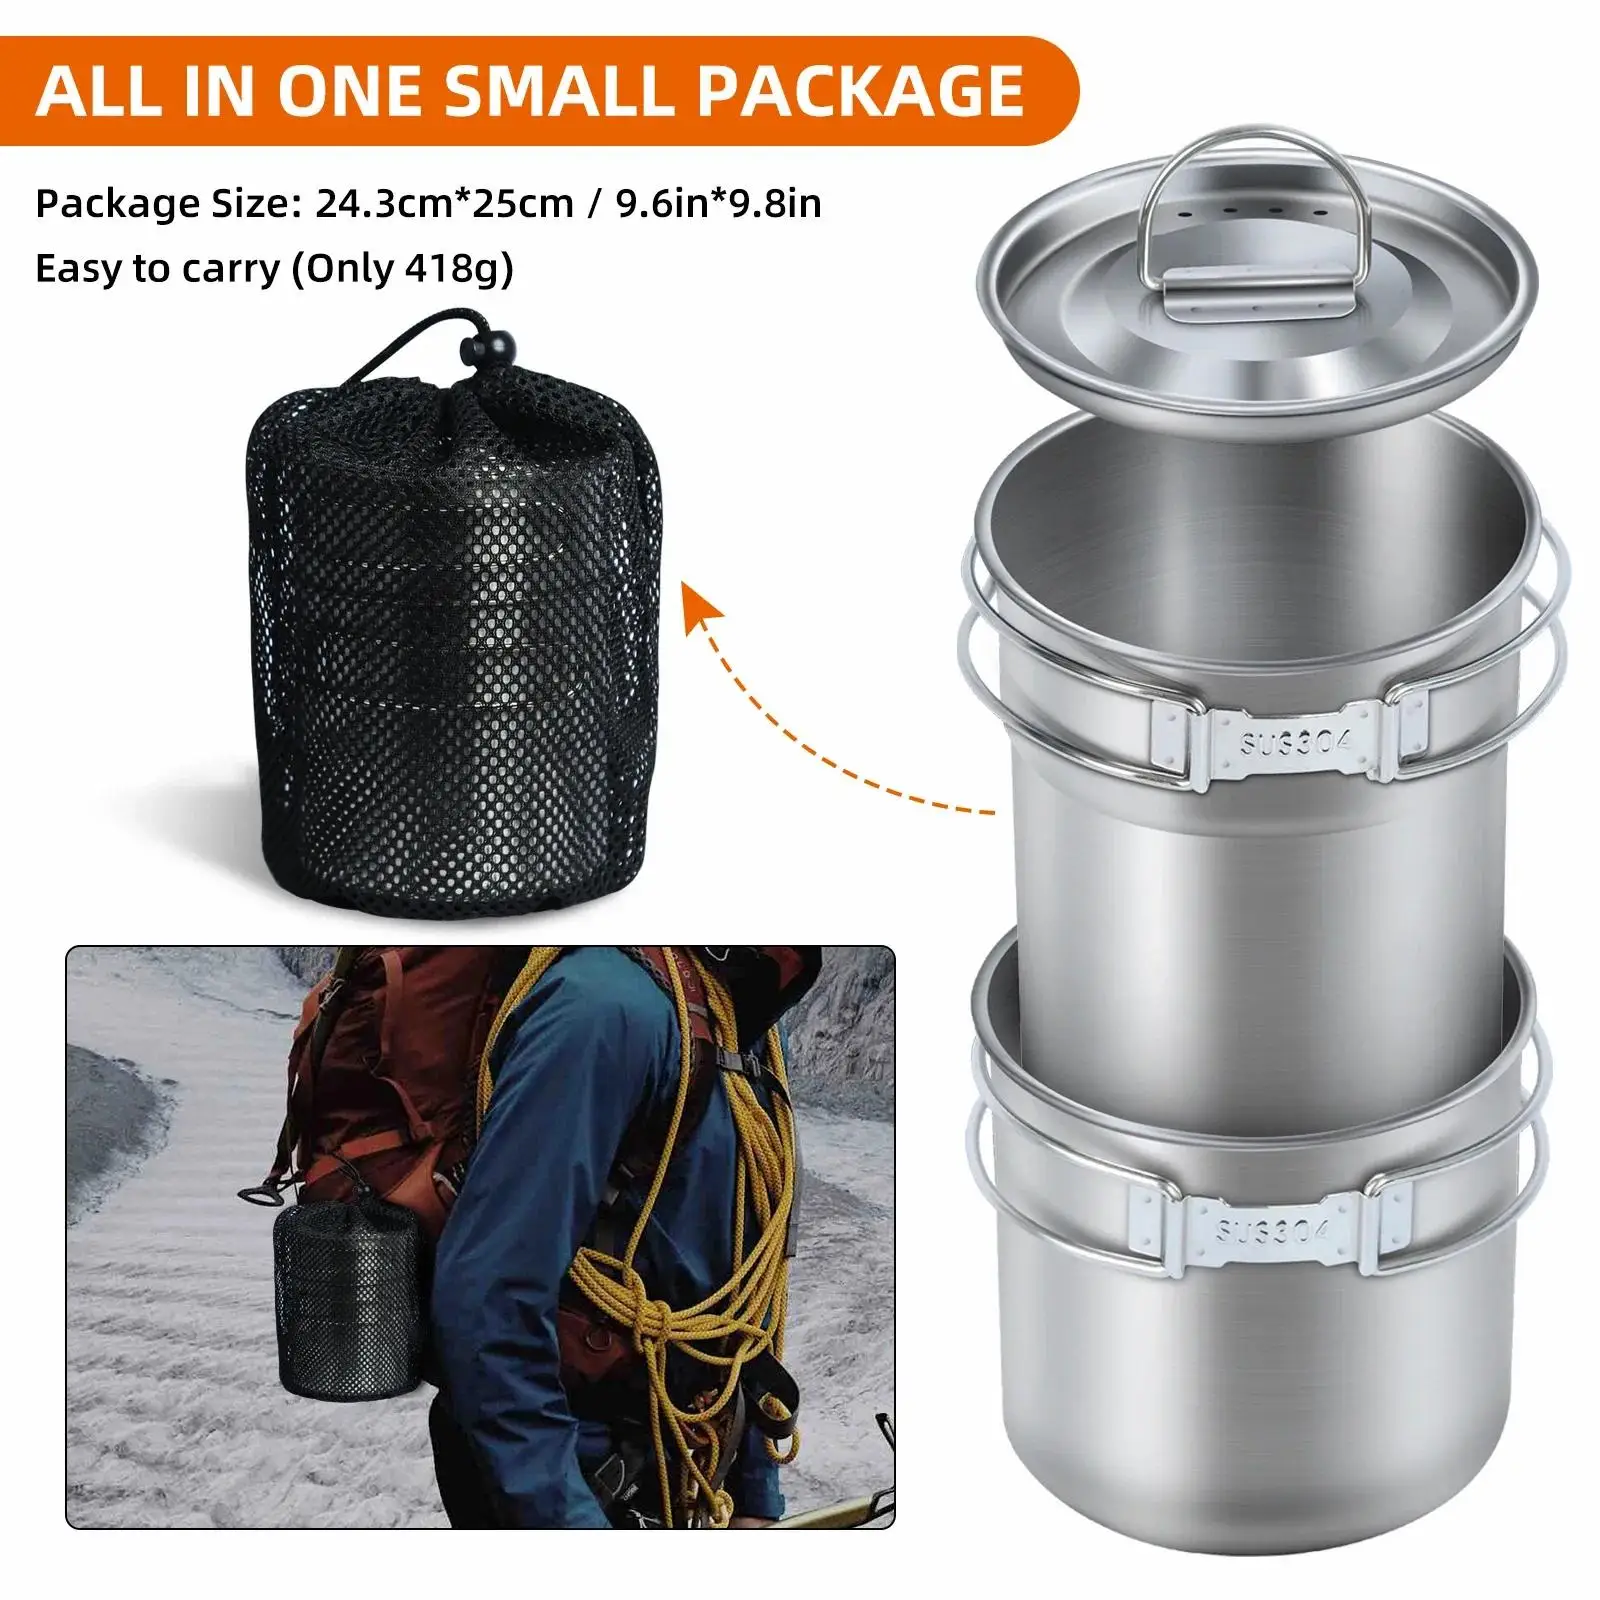 2PCS Outdoor Camping Mugs Portable Compact Stackable Stainless Steel Cups with Foldable Handle for Camping Fishing Backpacing